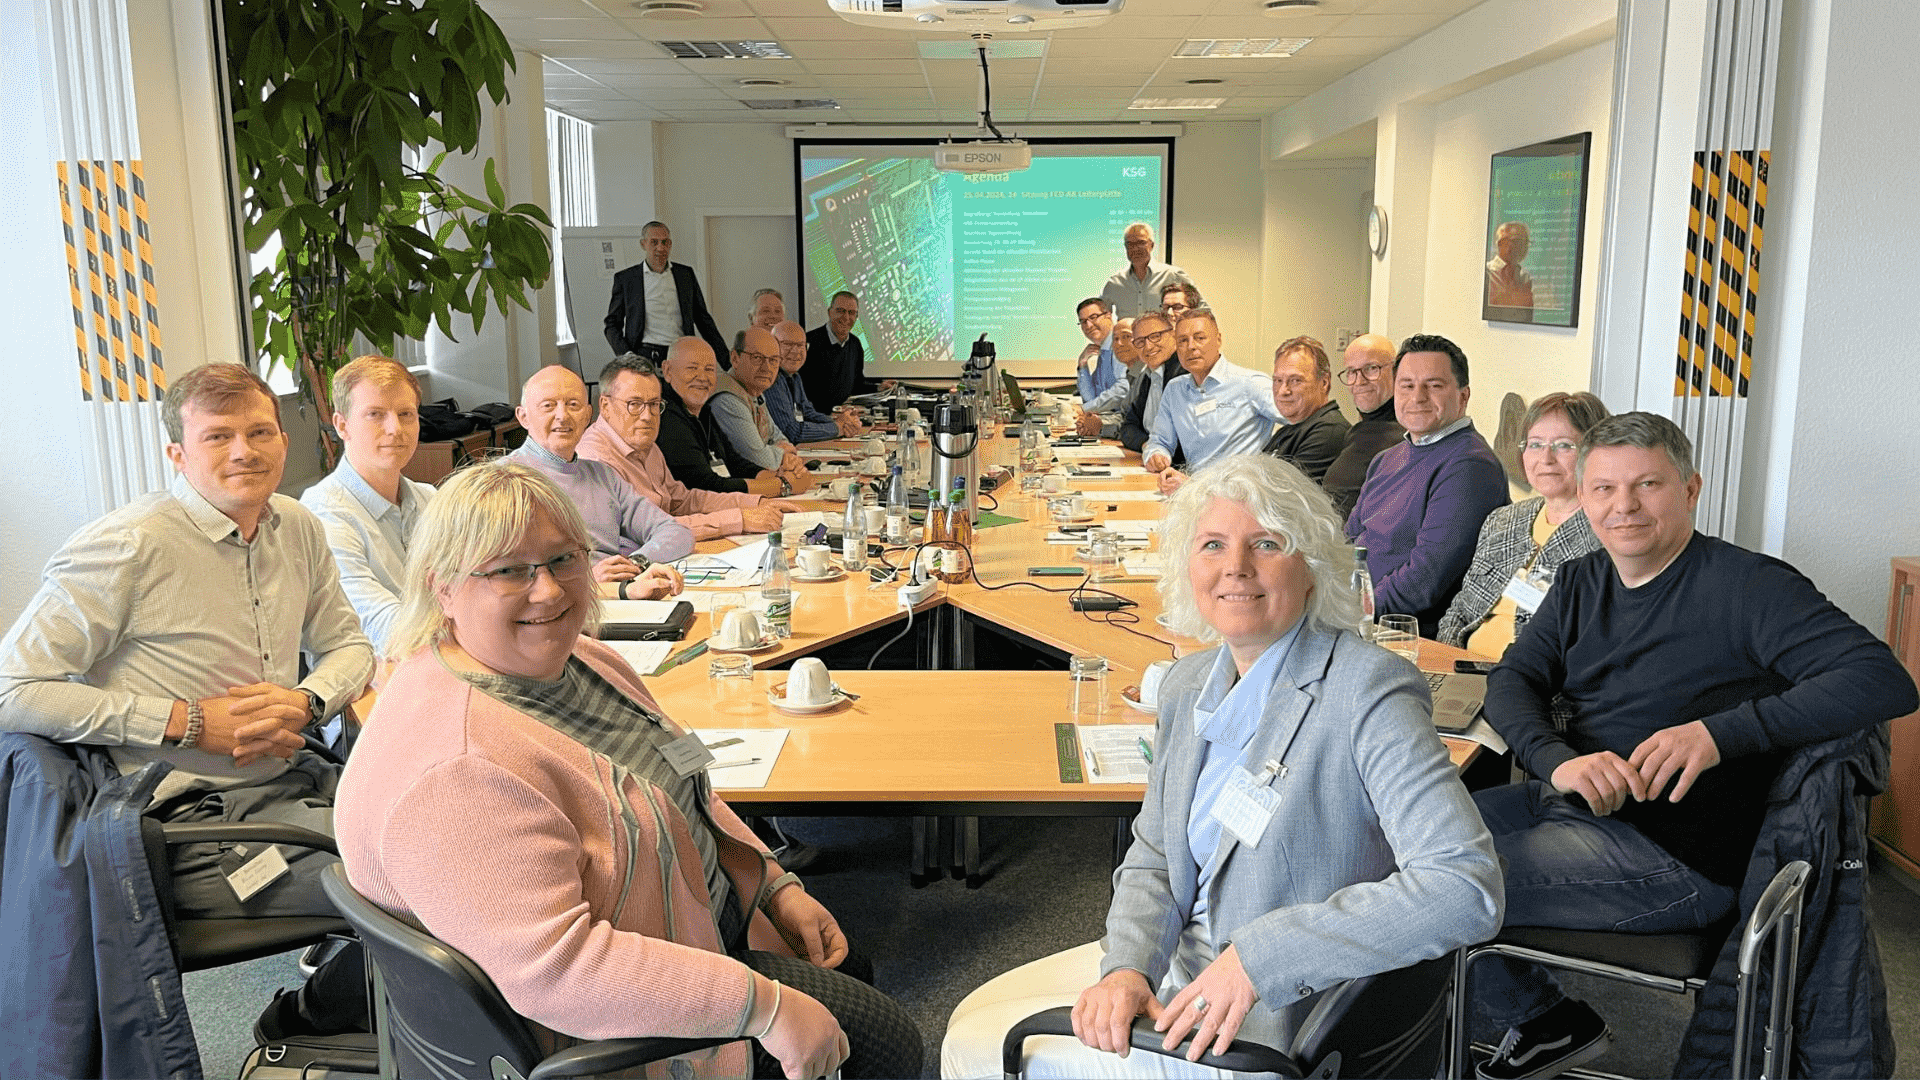 FED working group visited Europe's leading PCB manufacturer, KSG GmbH